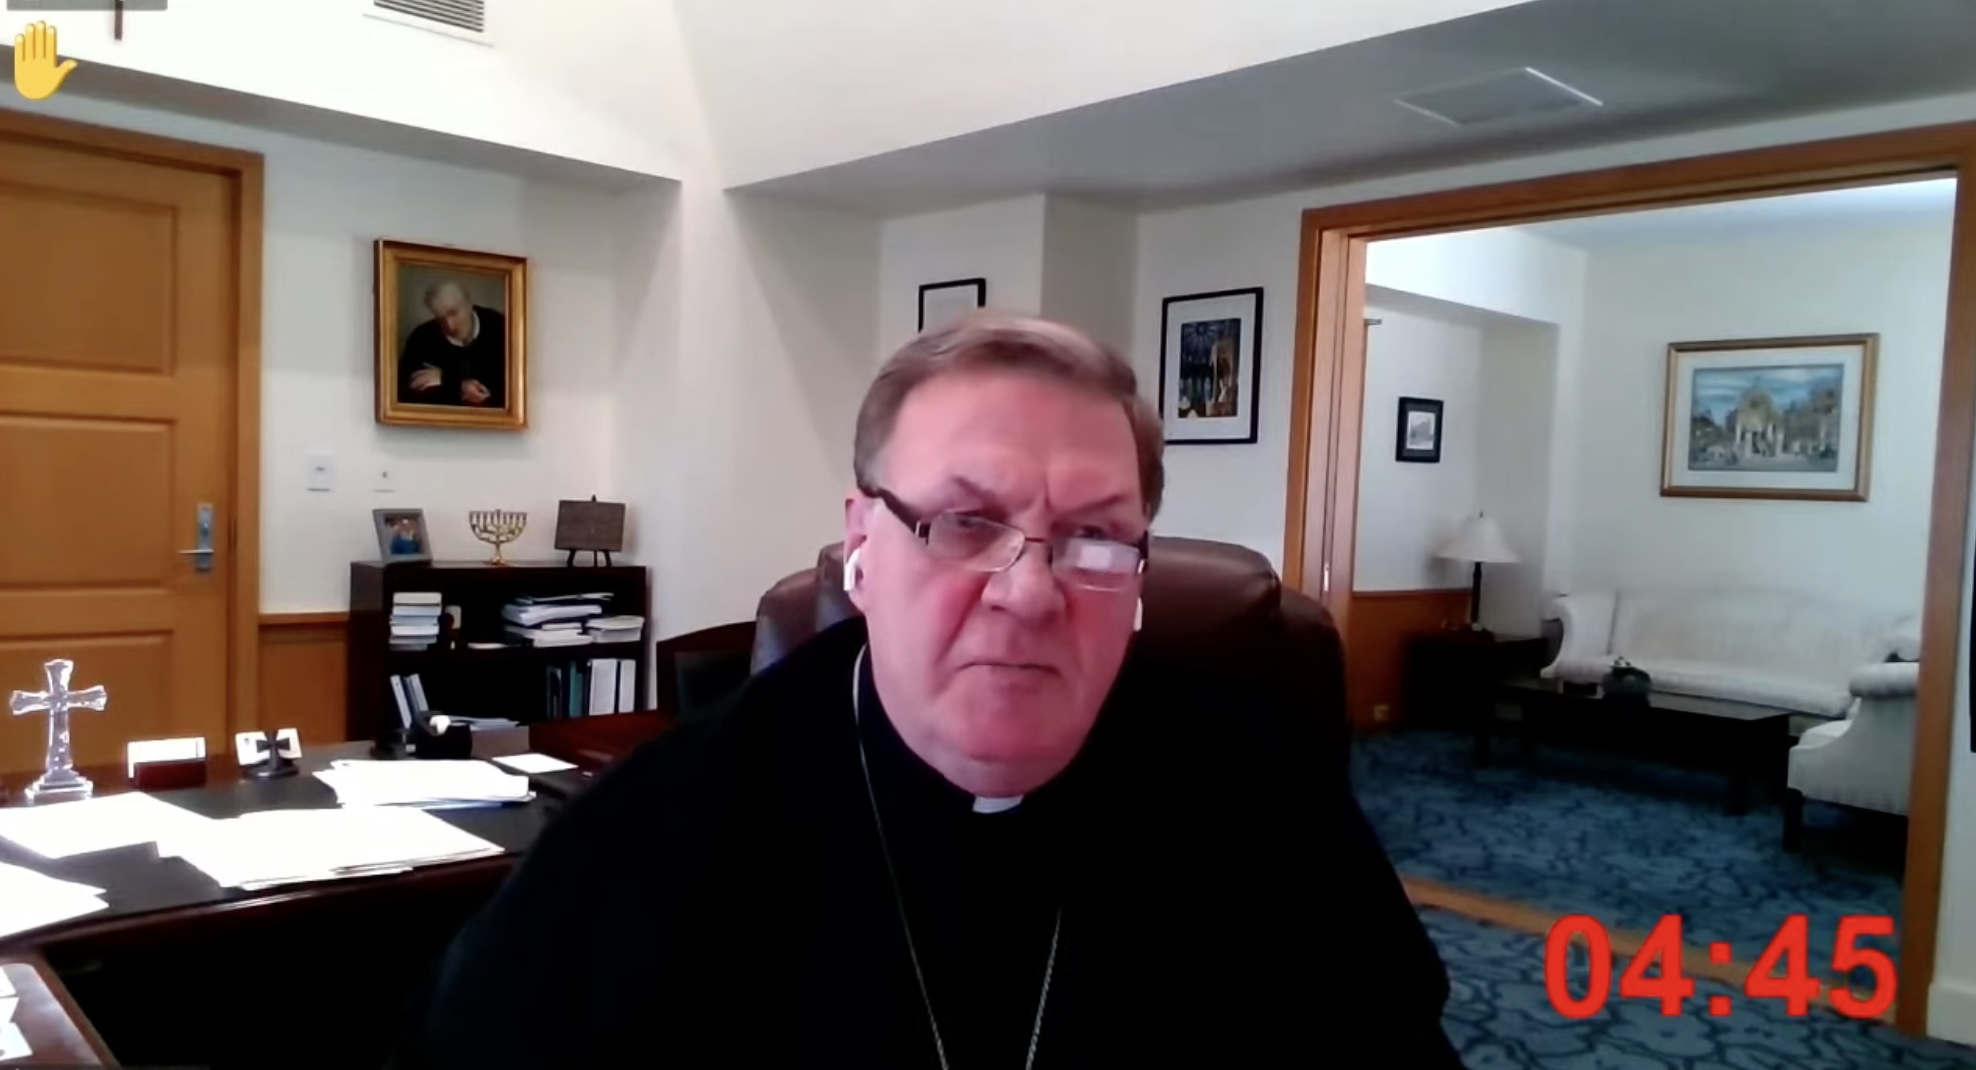 Cardinal Joseph Tobin of New Jersey participates in the June 2021 virtual meeting of the U.S. Conference of Catholic Bishops. Video screengrab